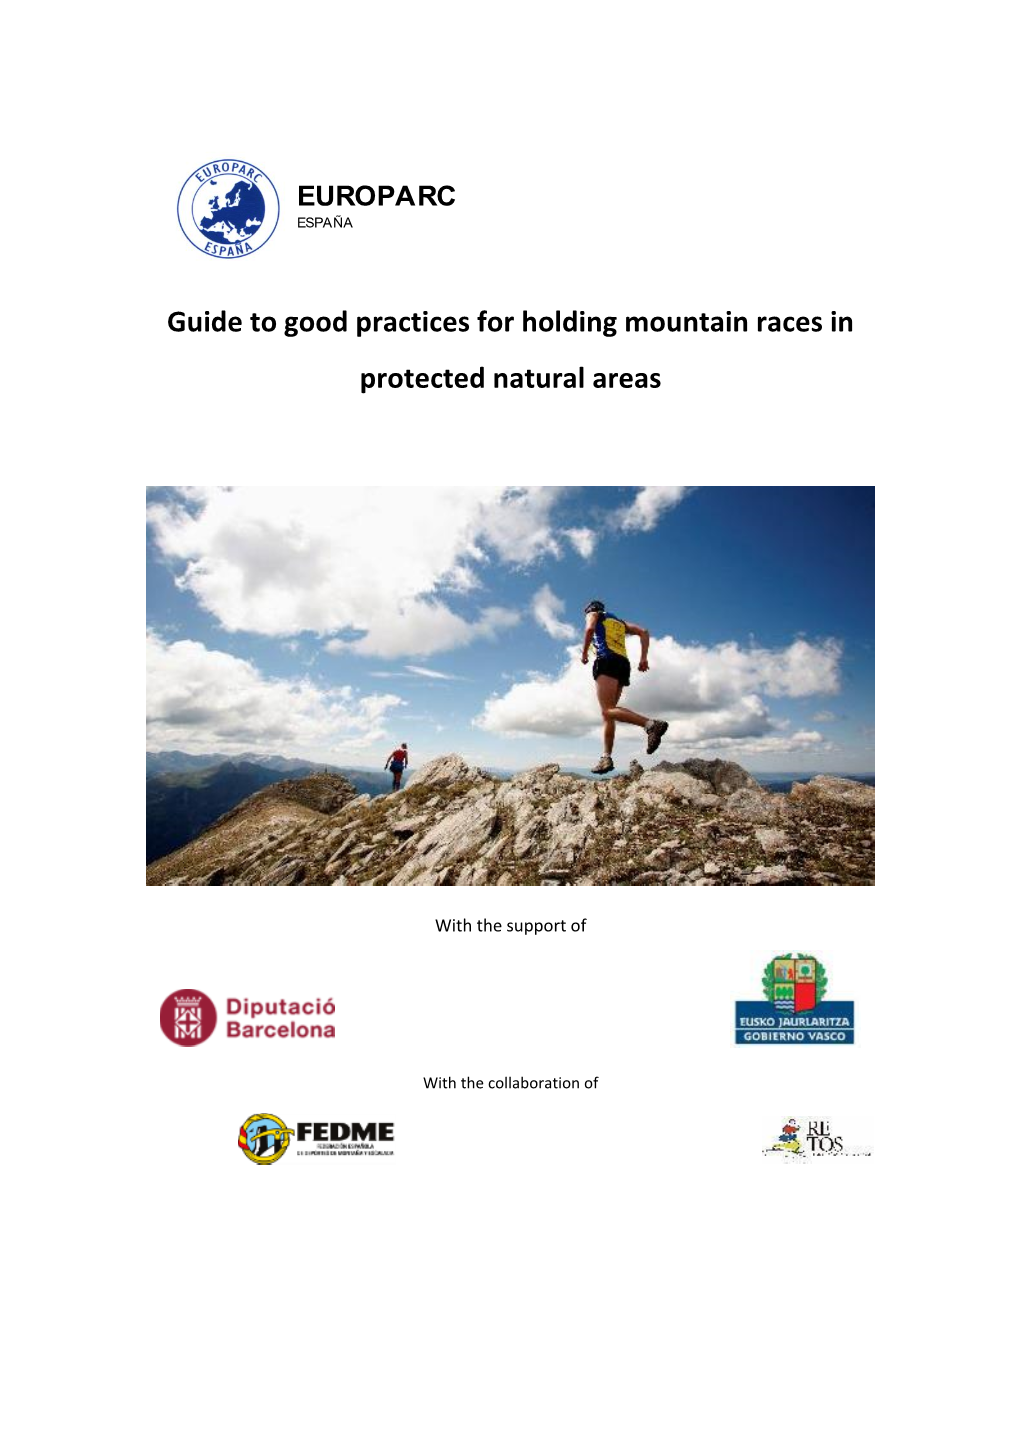 Guide to Good Practices for Holding Mountain Races in Protected Natural Areas